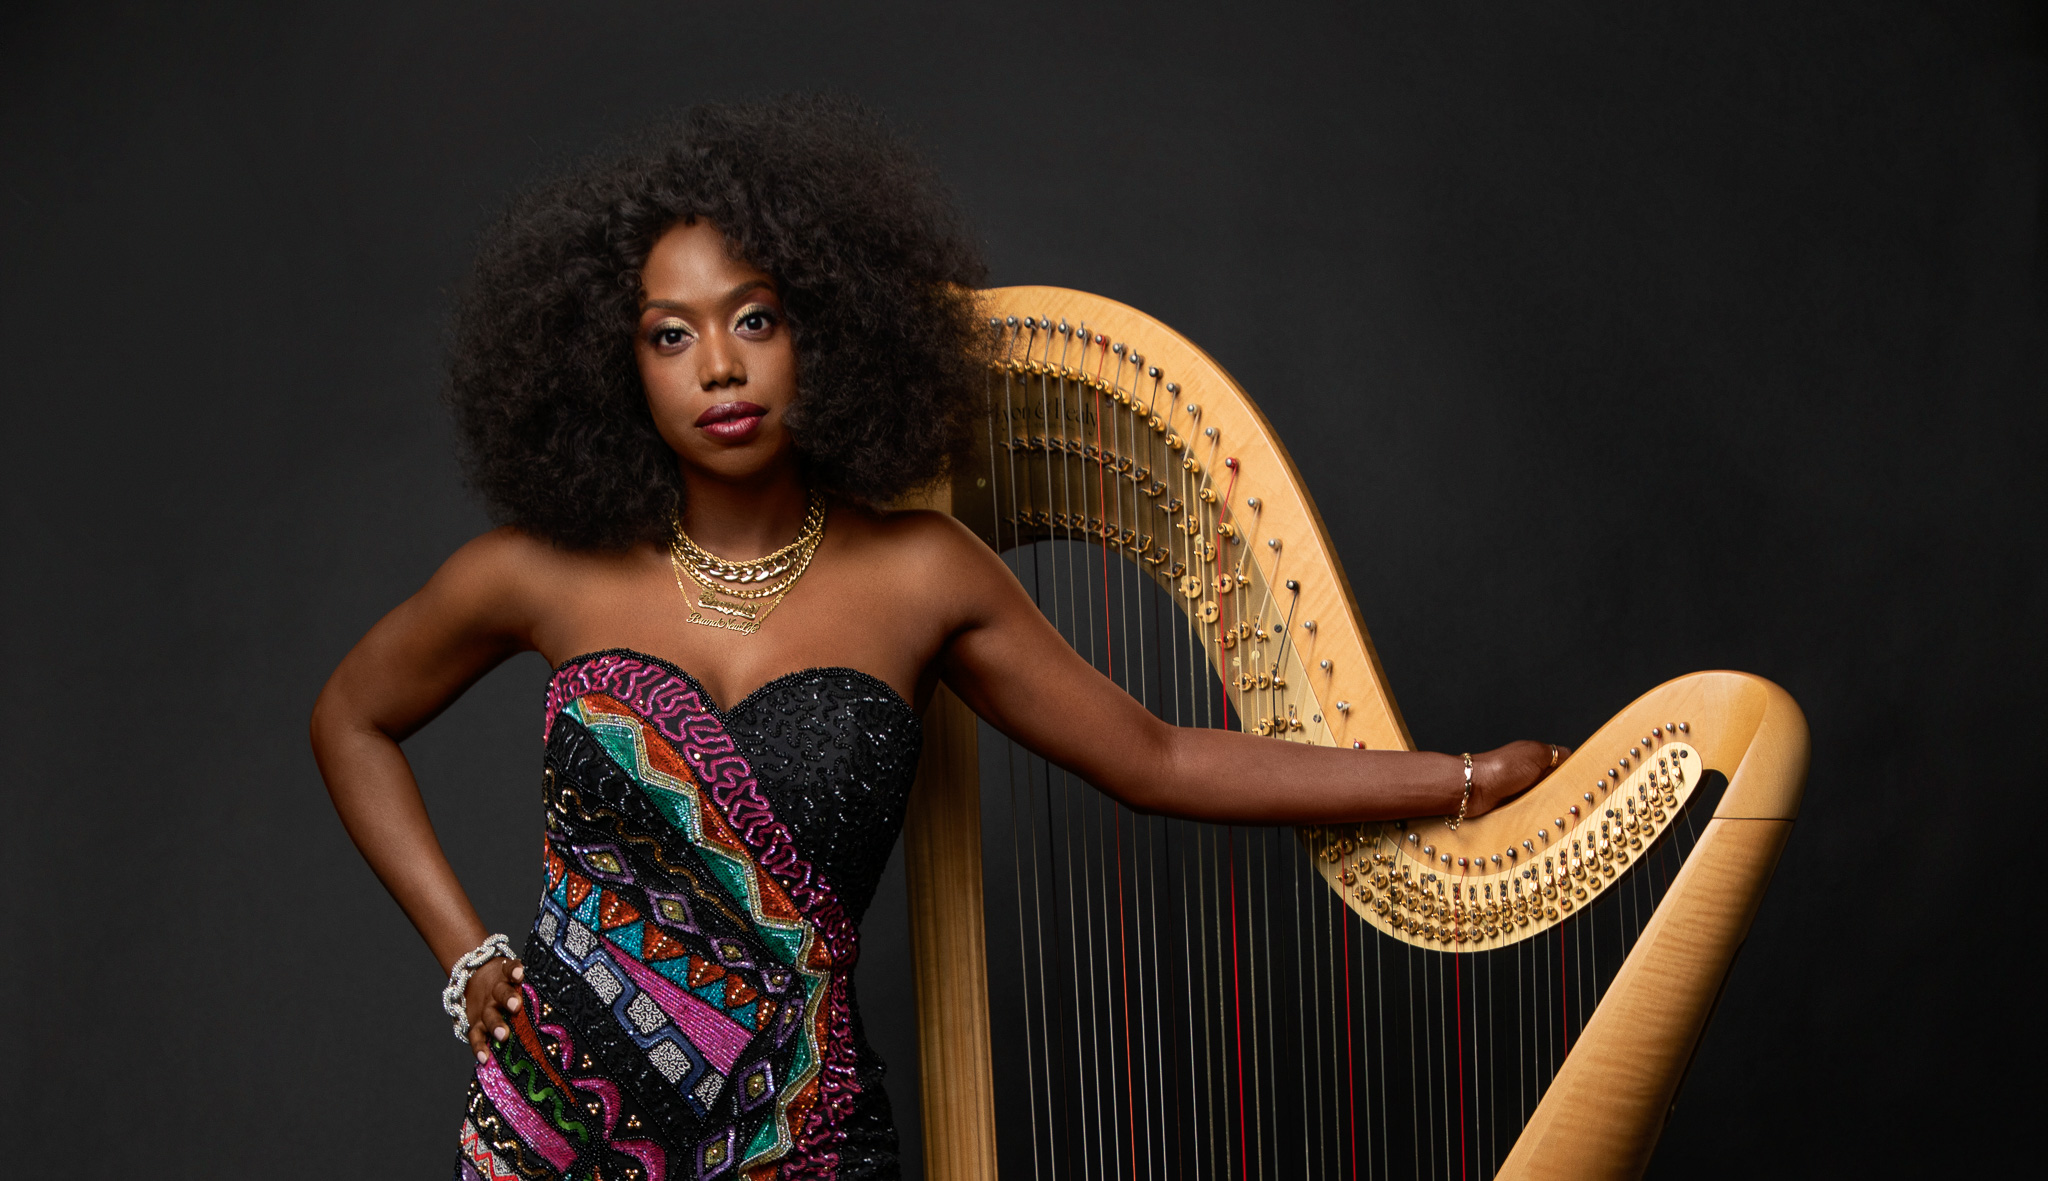 Brandee Younger stands in front of her harp with one arm draped over the instrument